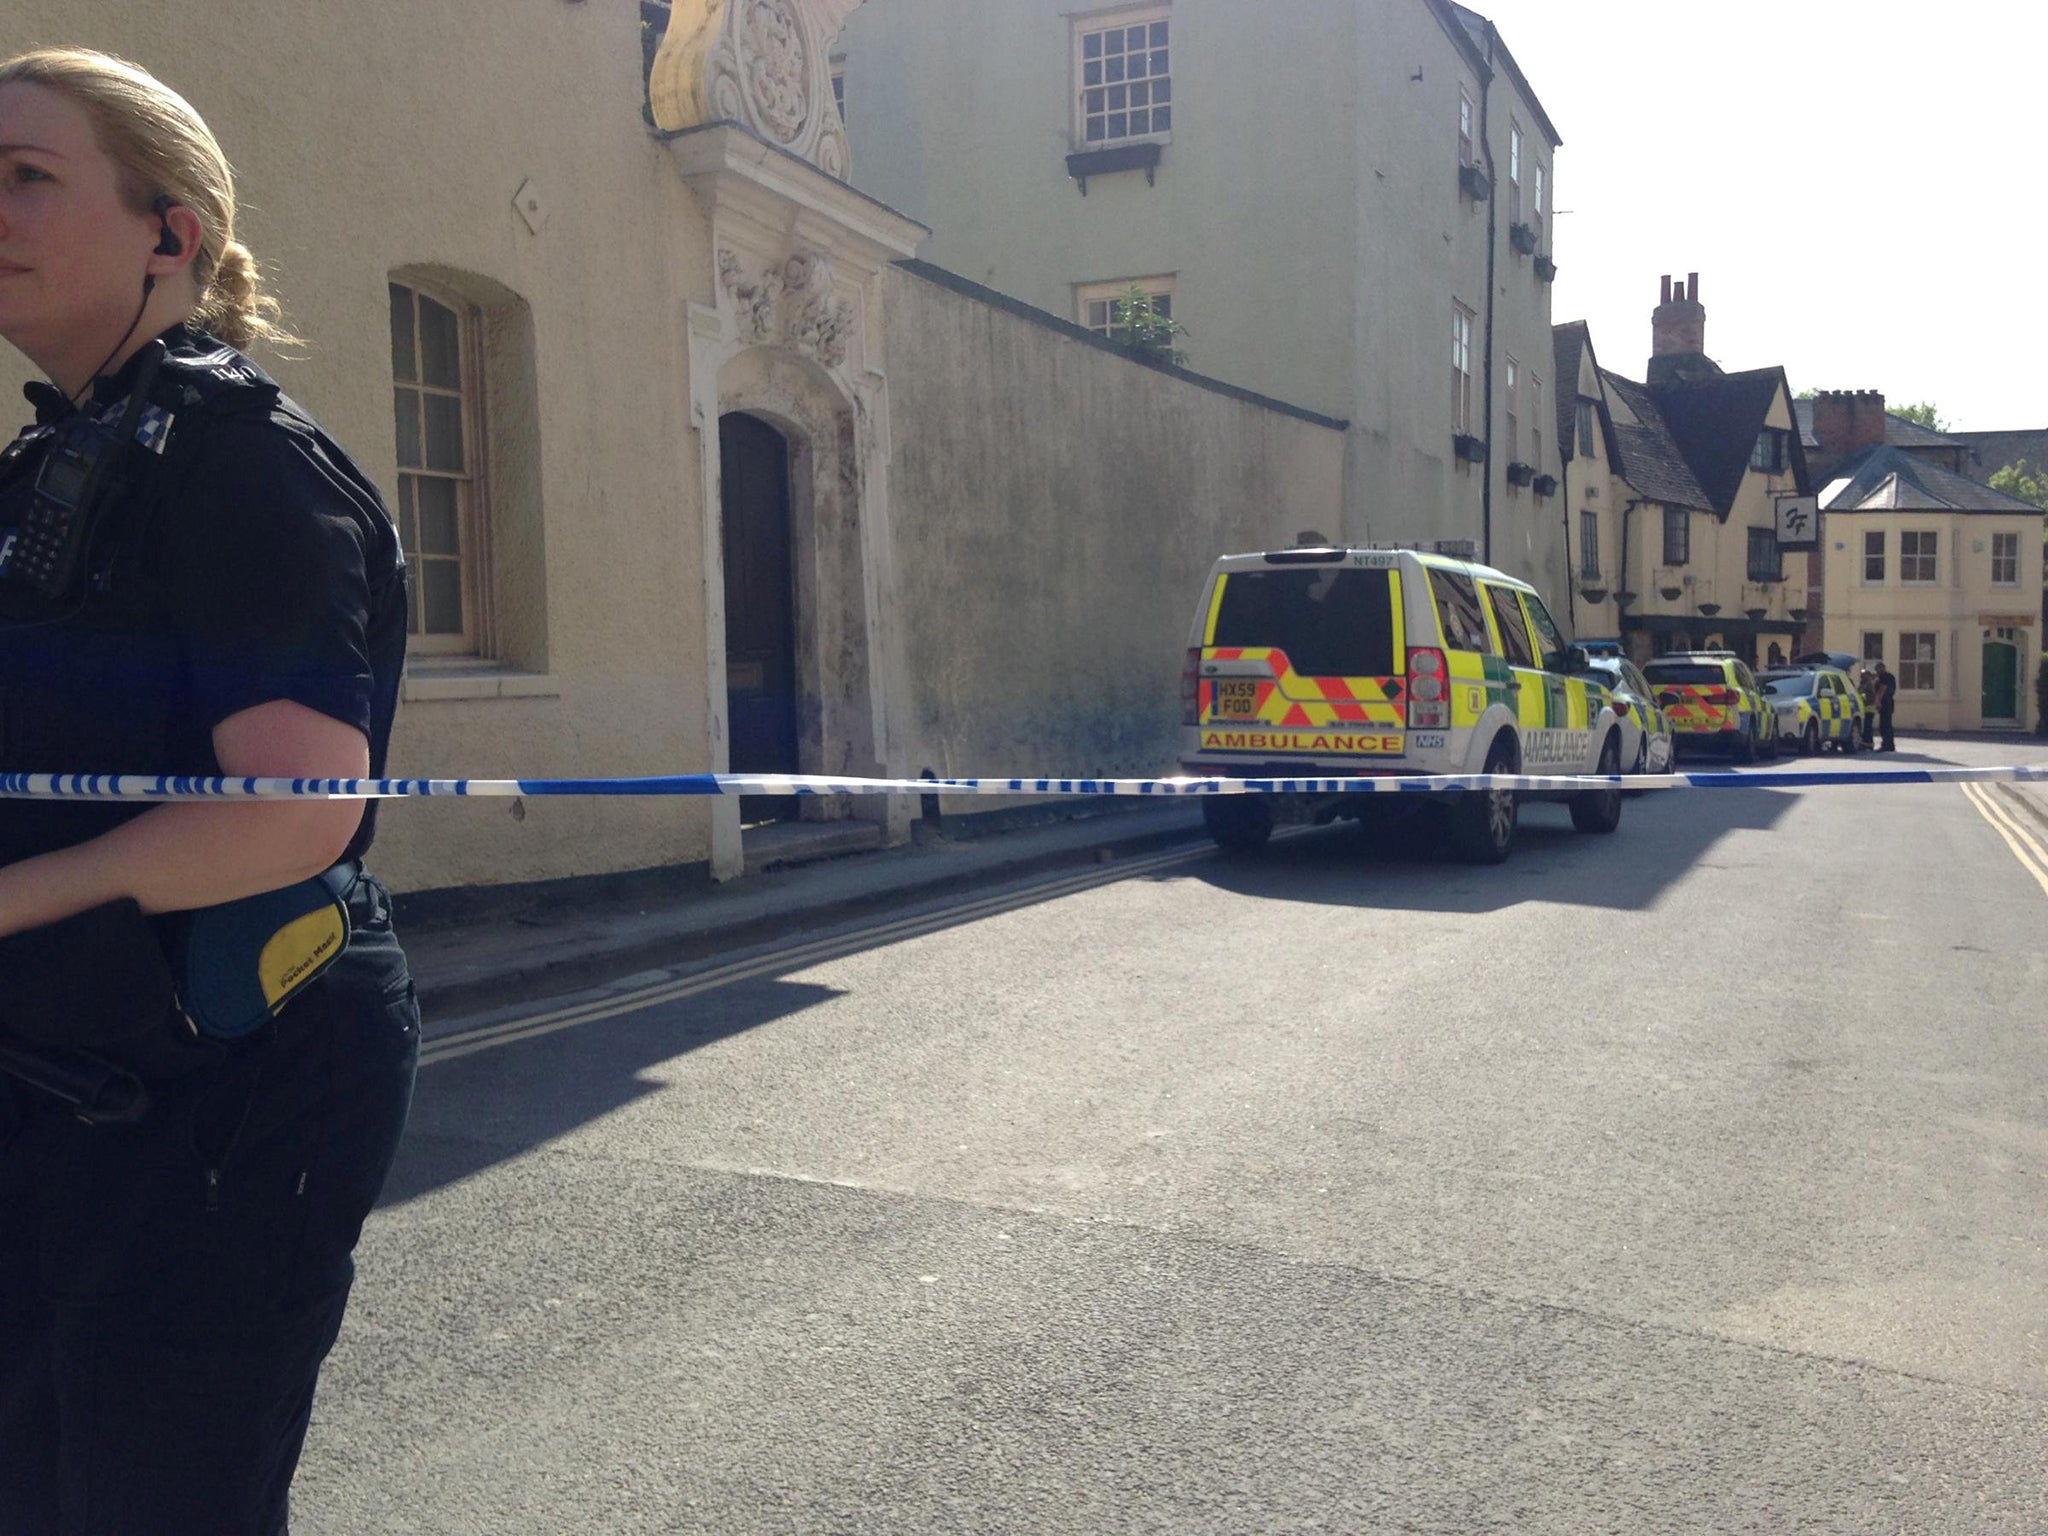 Police have cordoned off an area in central Oxford amid reports of an armed man